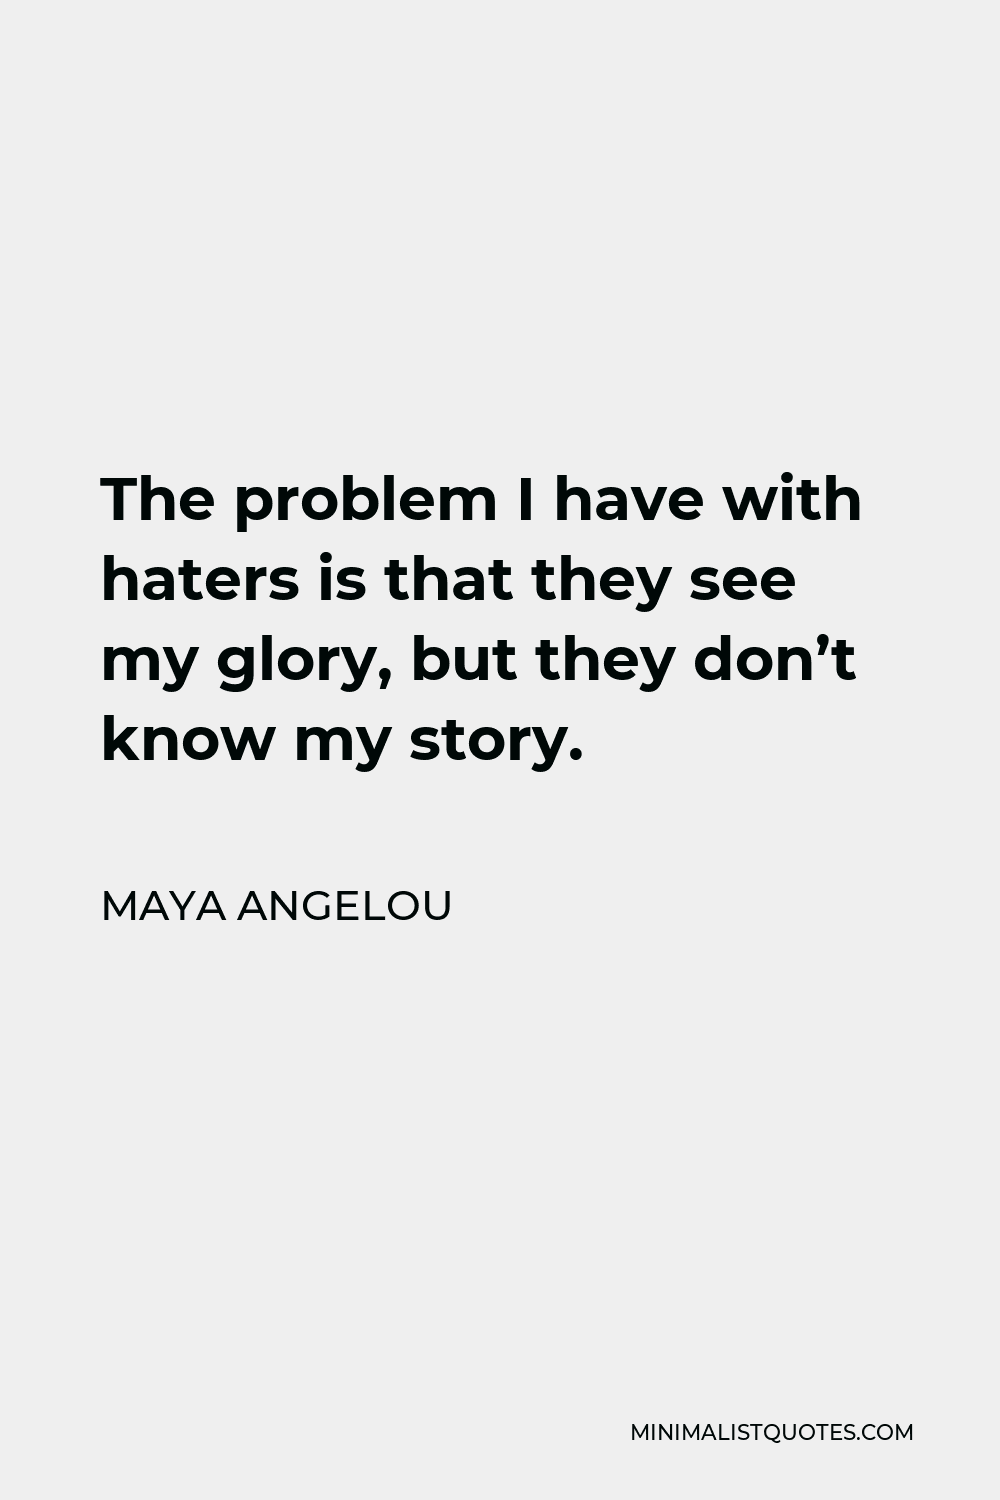 Maya Angelou Quote - The problem I have with haters is that they see my glory, but they don’t know my story.